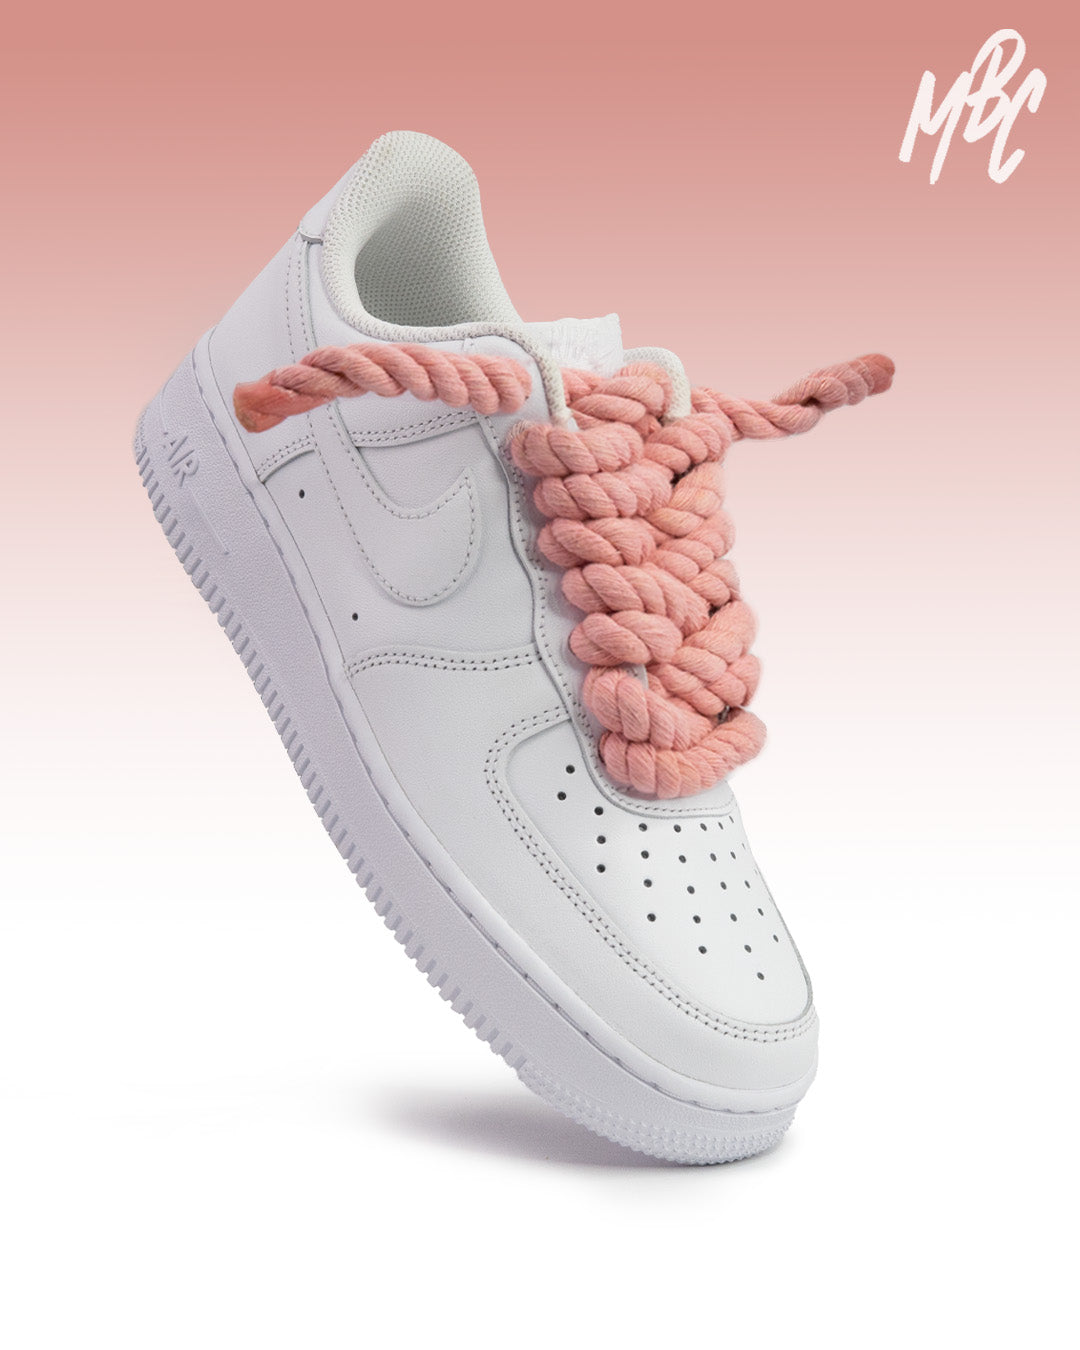 Nike Air Force 1 With Custom Rope Laces